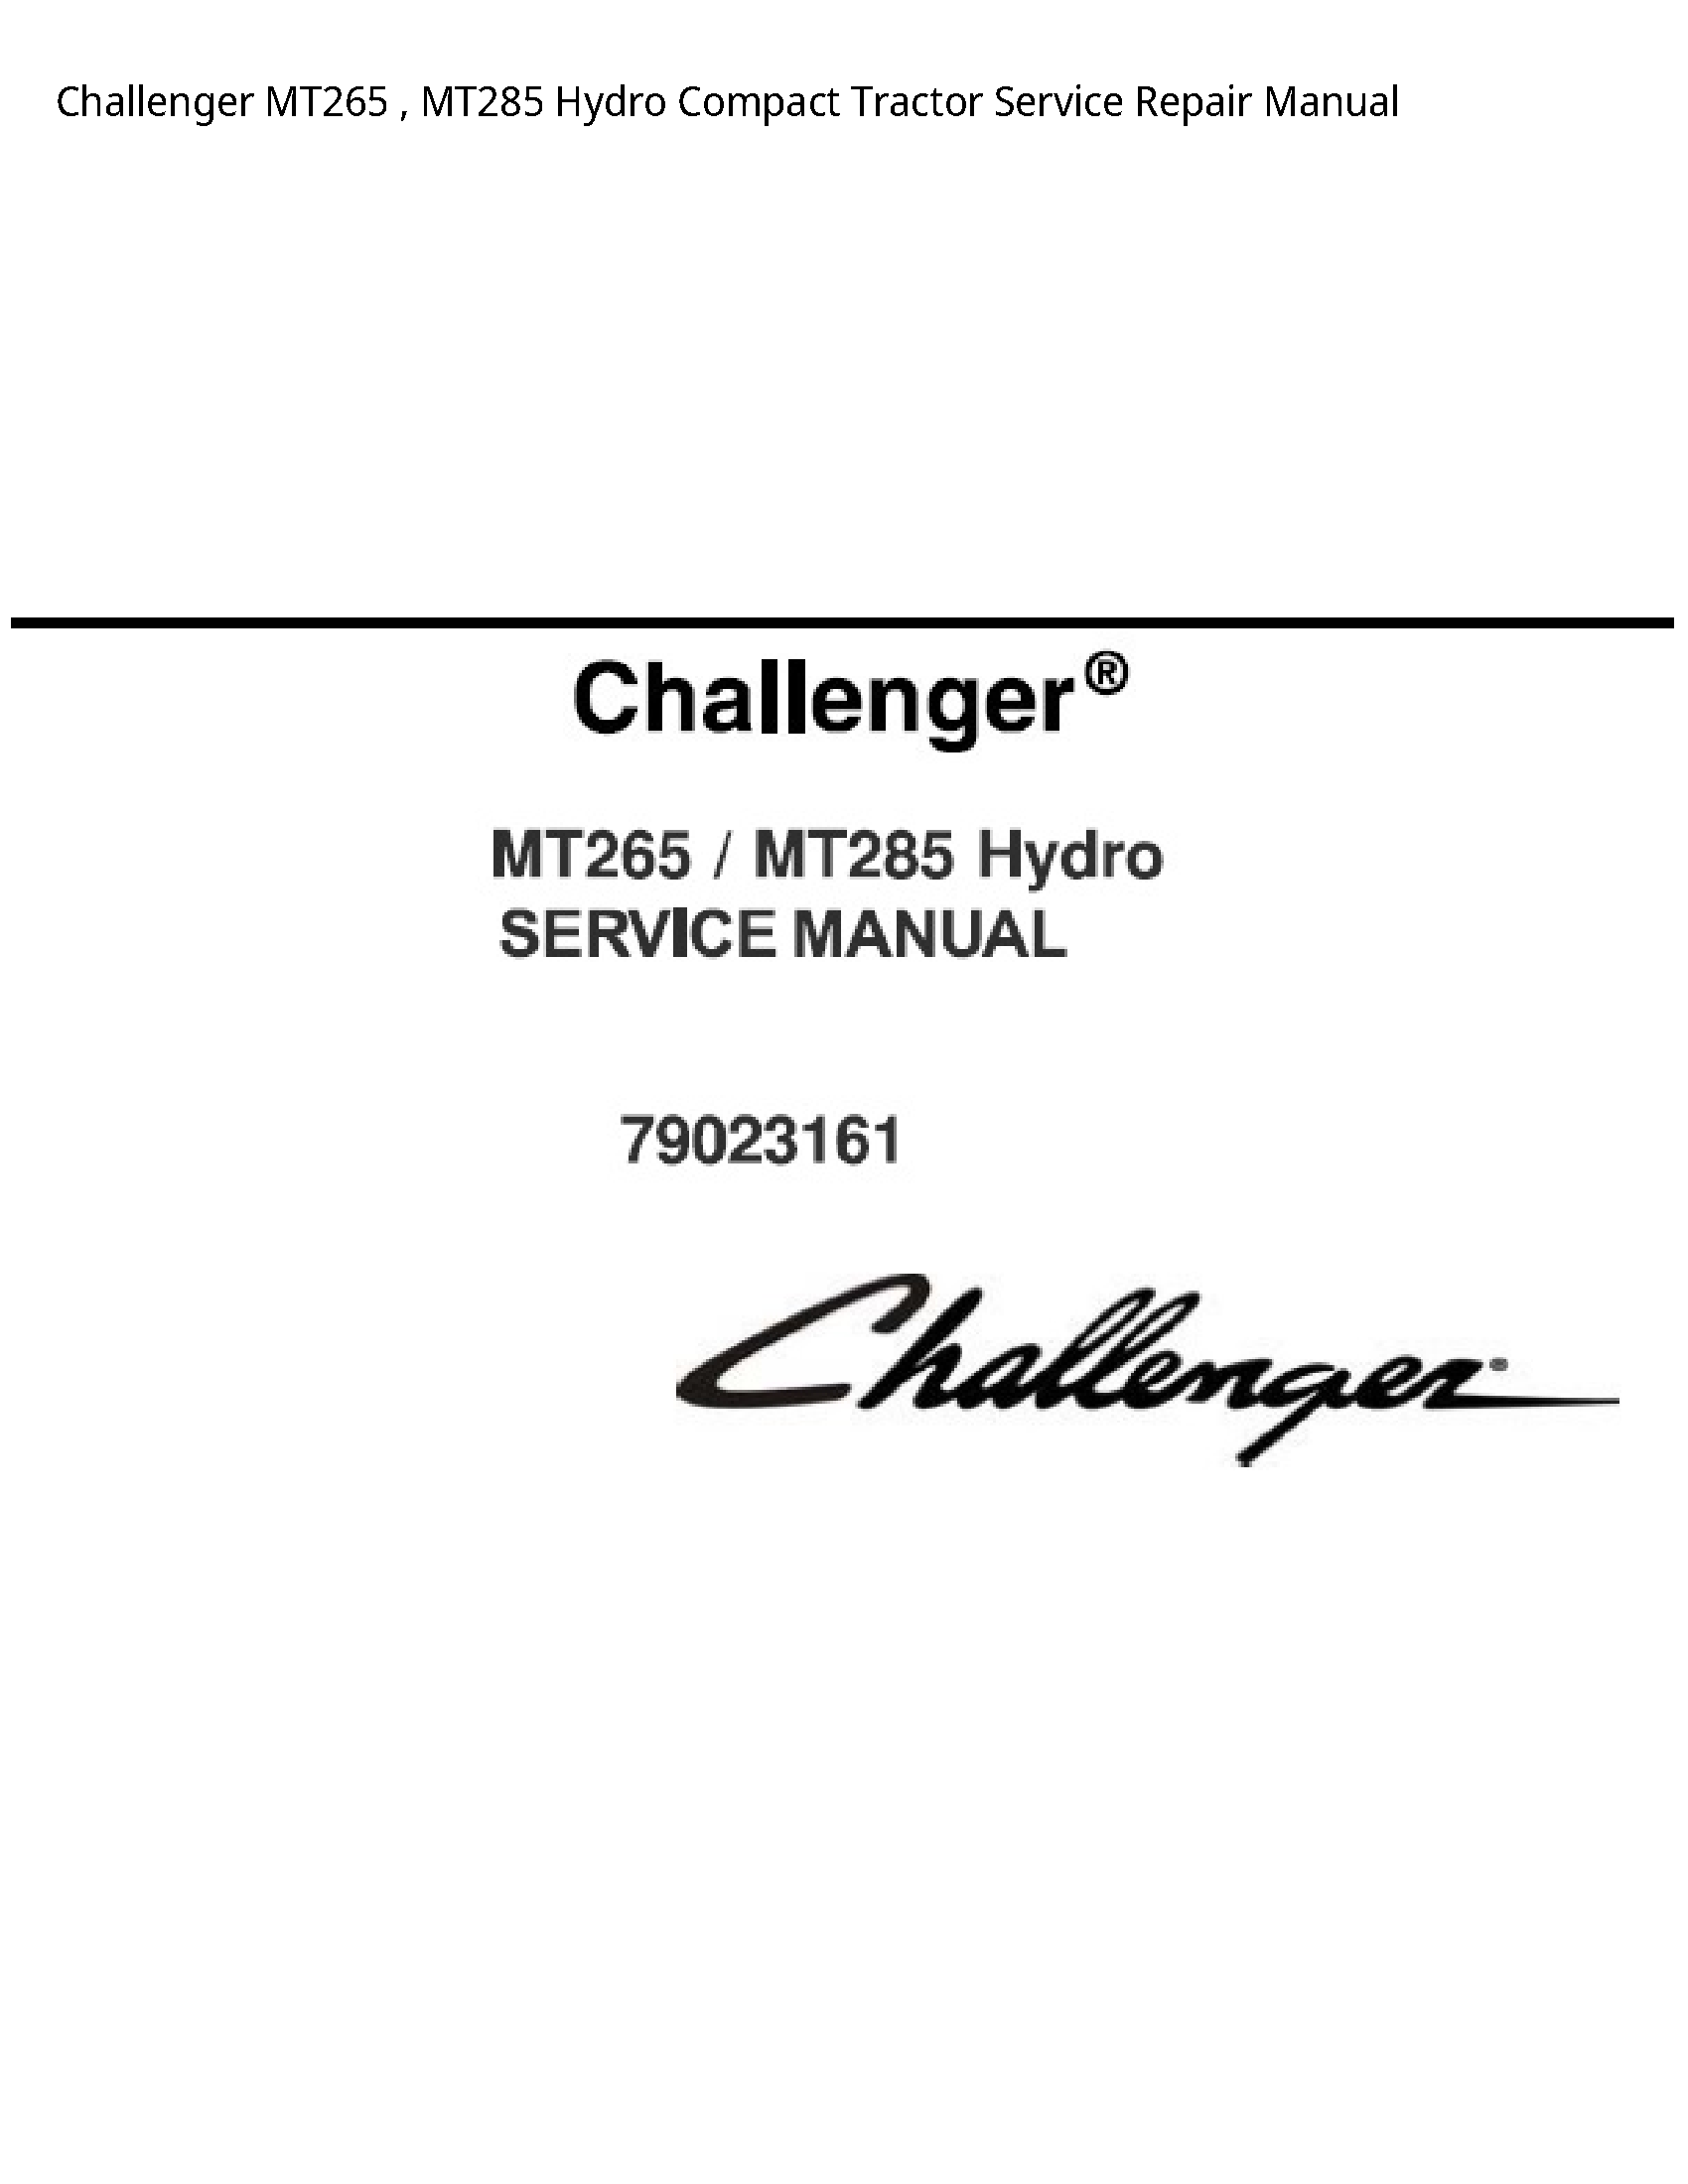 Challenger MT265 Hydro Compact Tractor manual